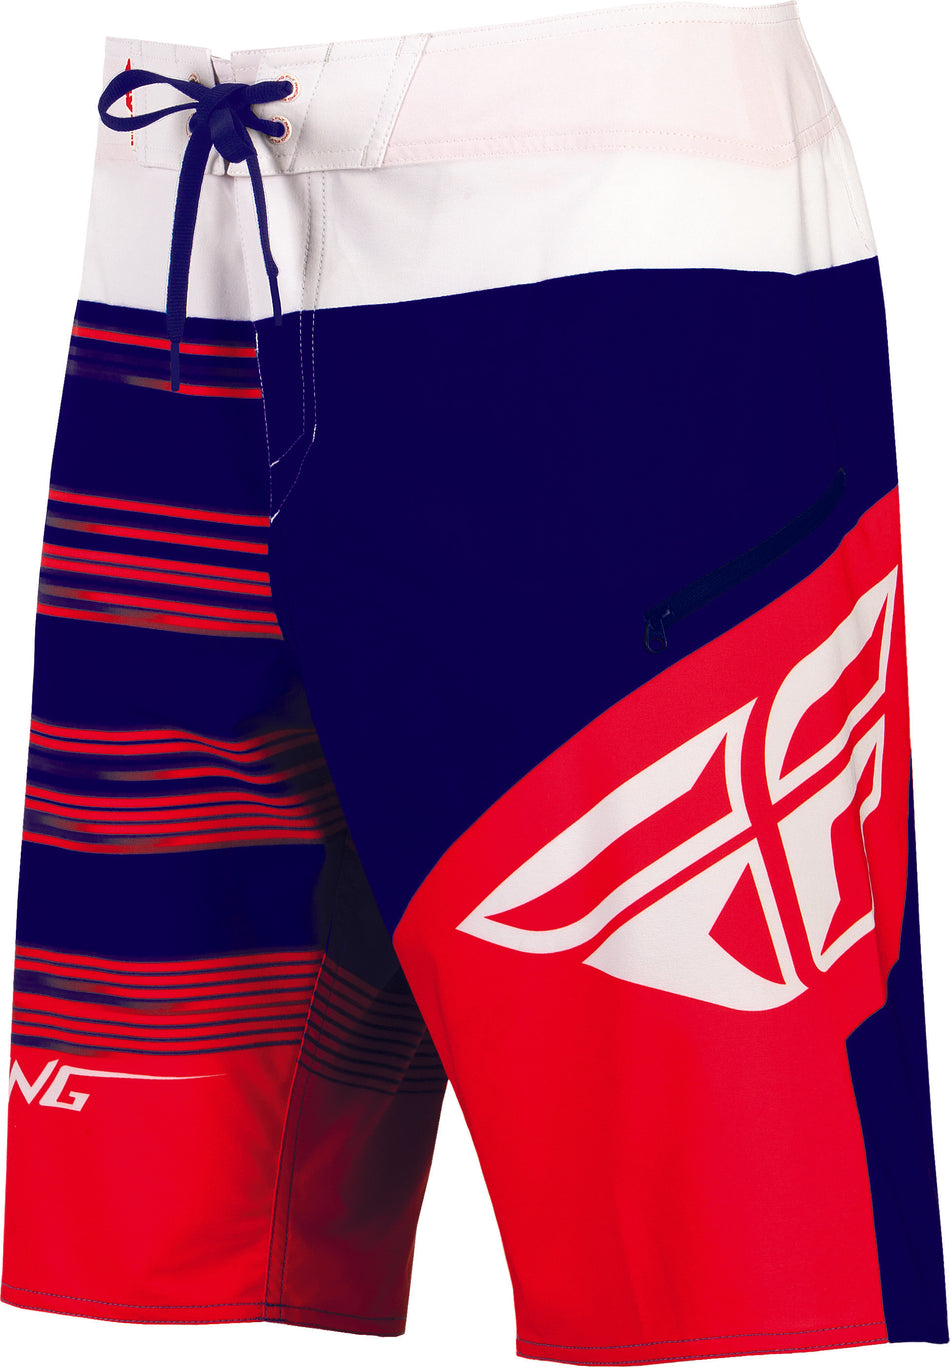 FLY RACING Influx Boardshorts Red/Blue/White Sz 30 353-19230